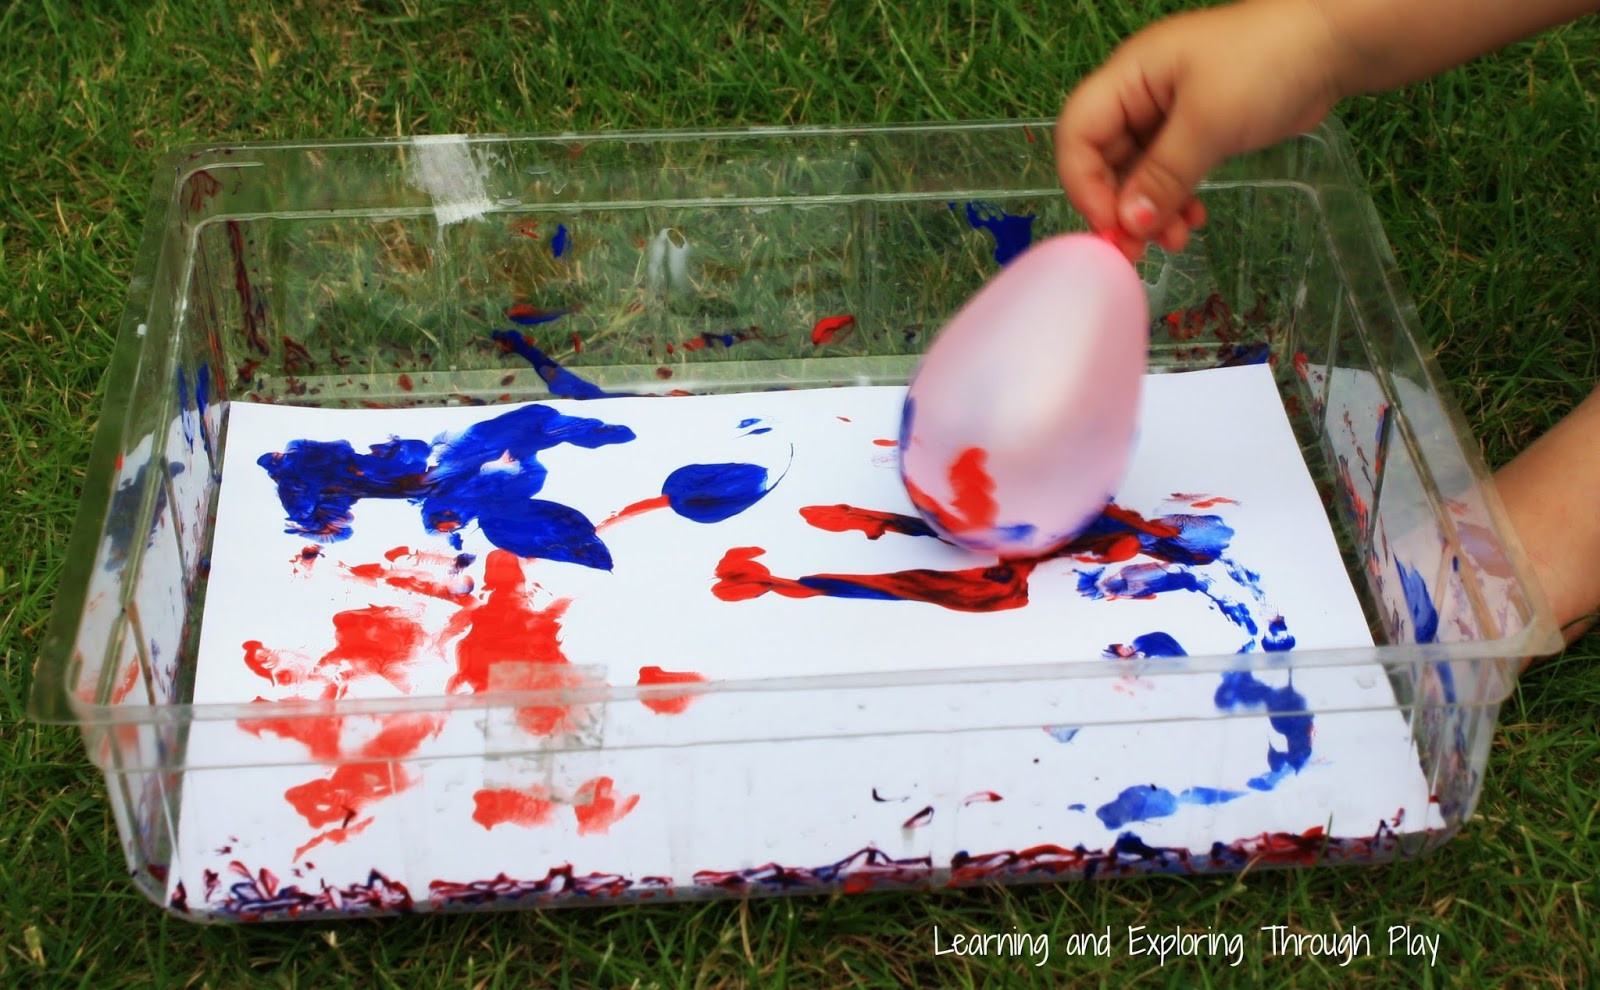 4th Of July Arts And Crafts For Preschoolers
 Learning and Exploring Through Play 4th of July Arts and